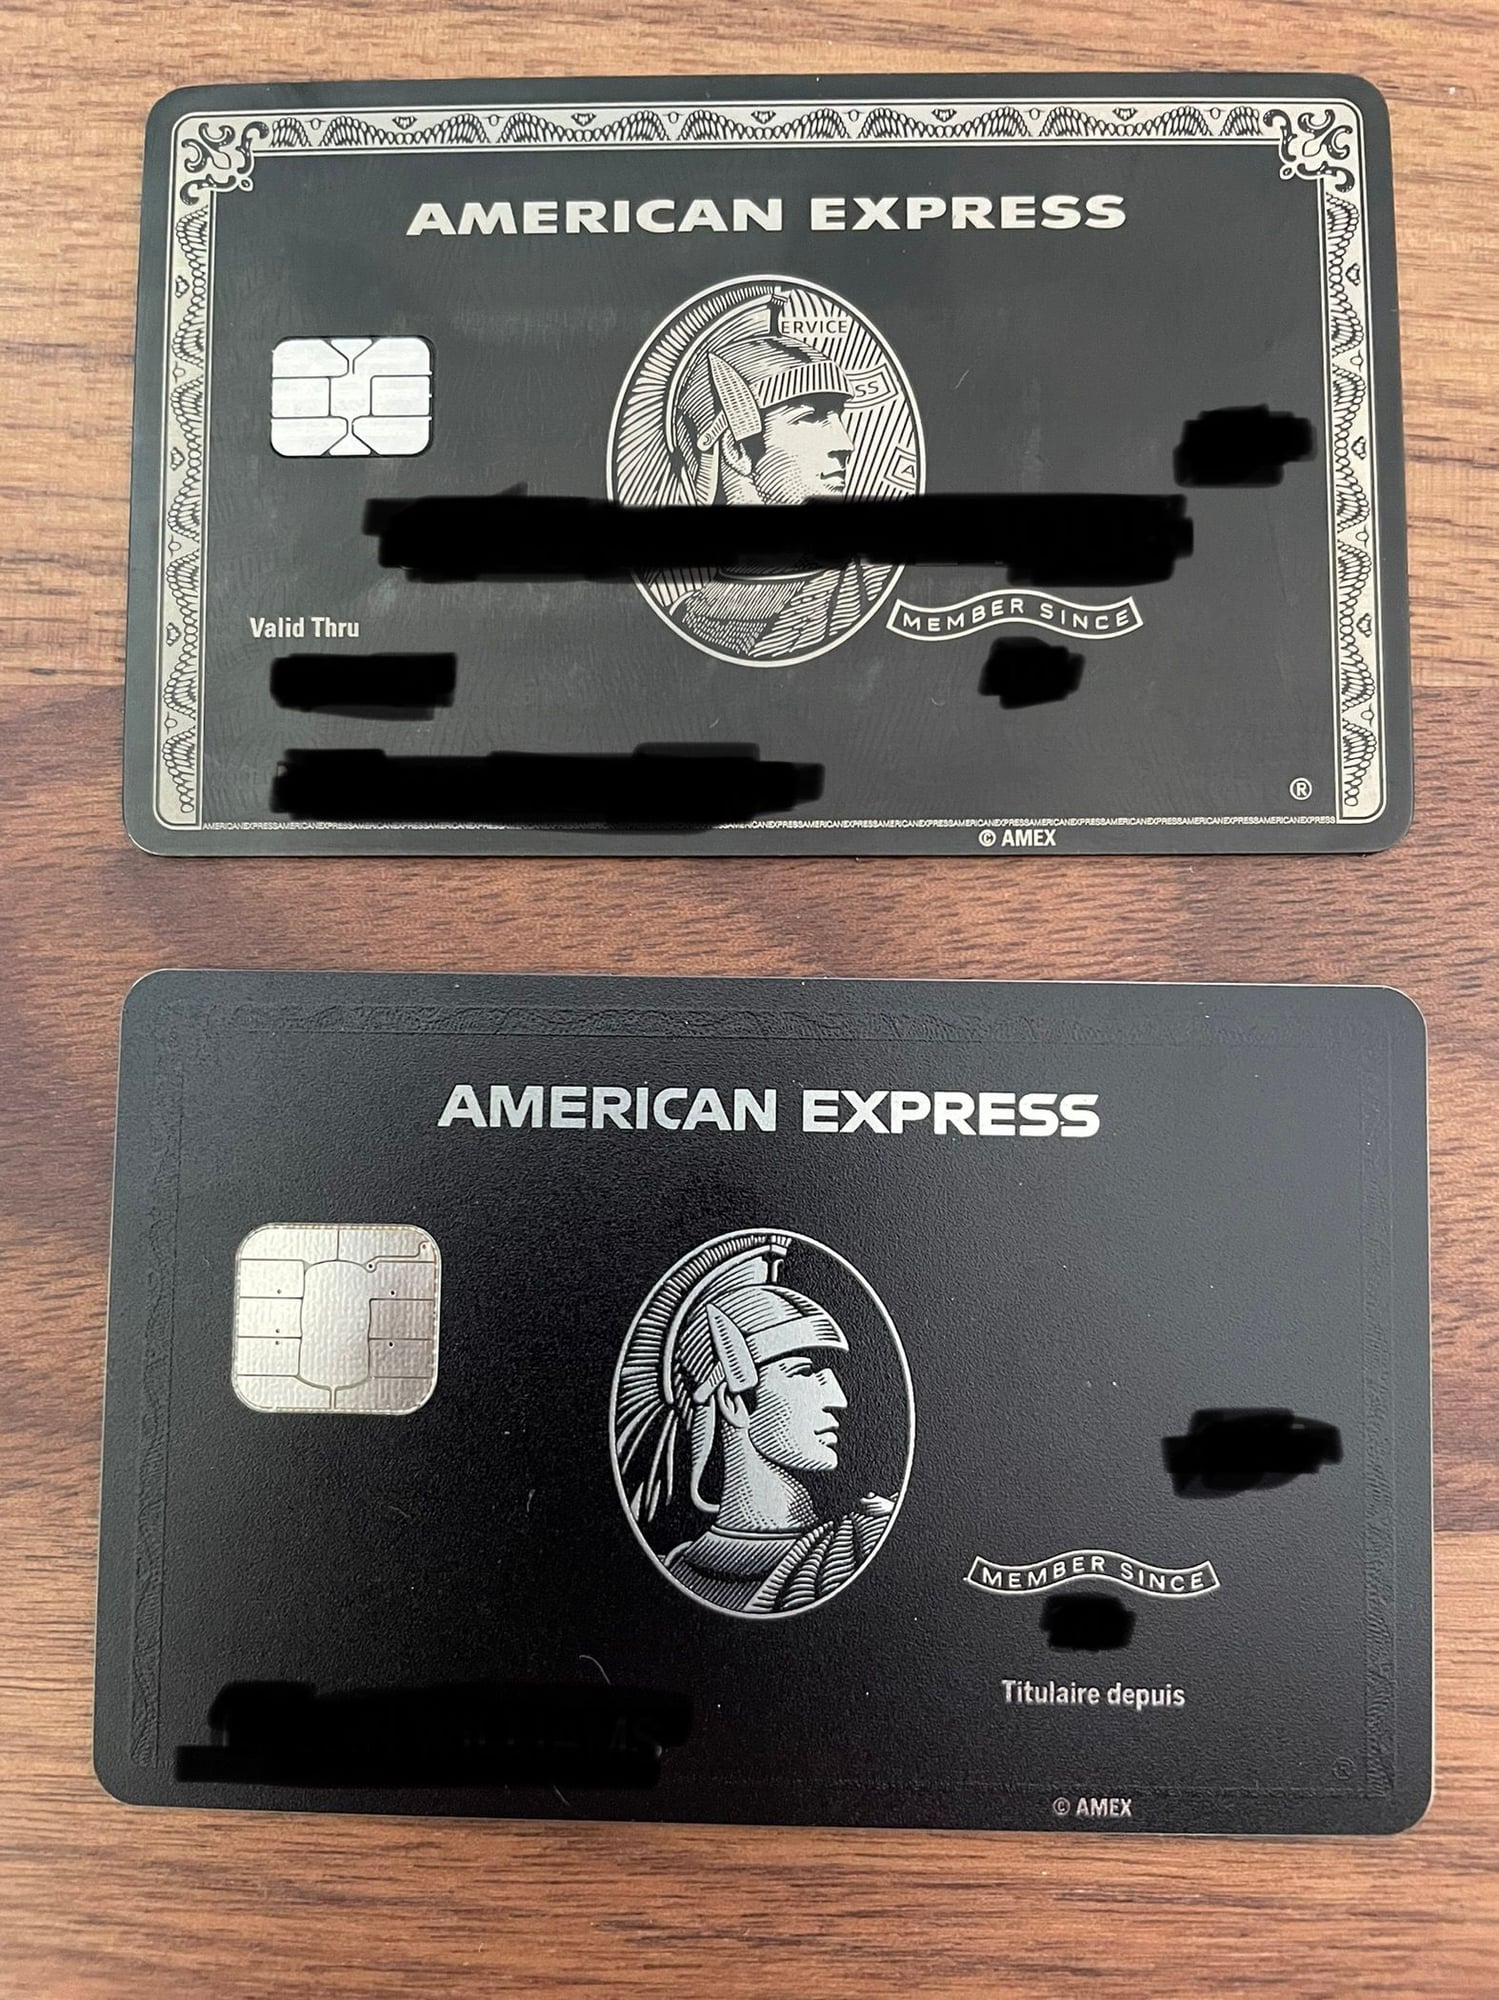 American Express Reveals New Black Card Designs and Exclusive Prada Collab  - Airows